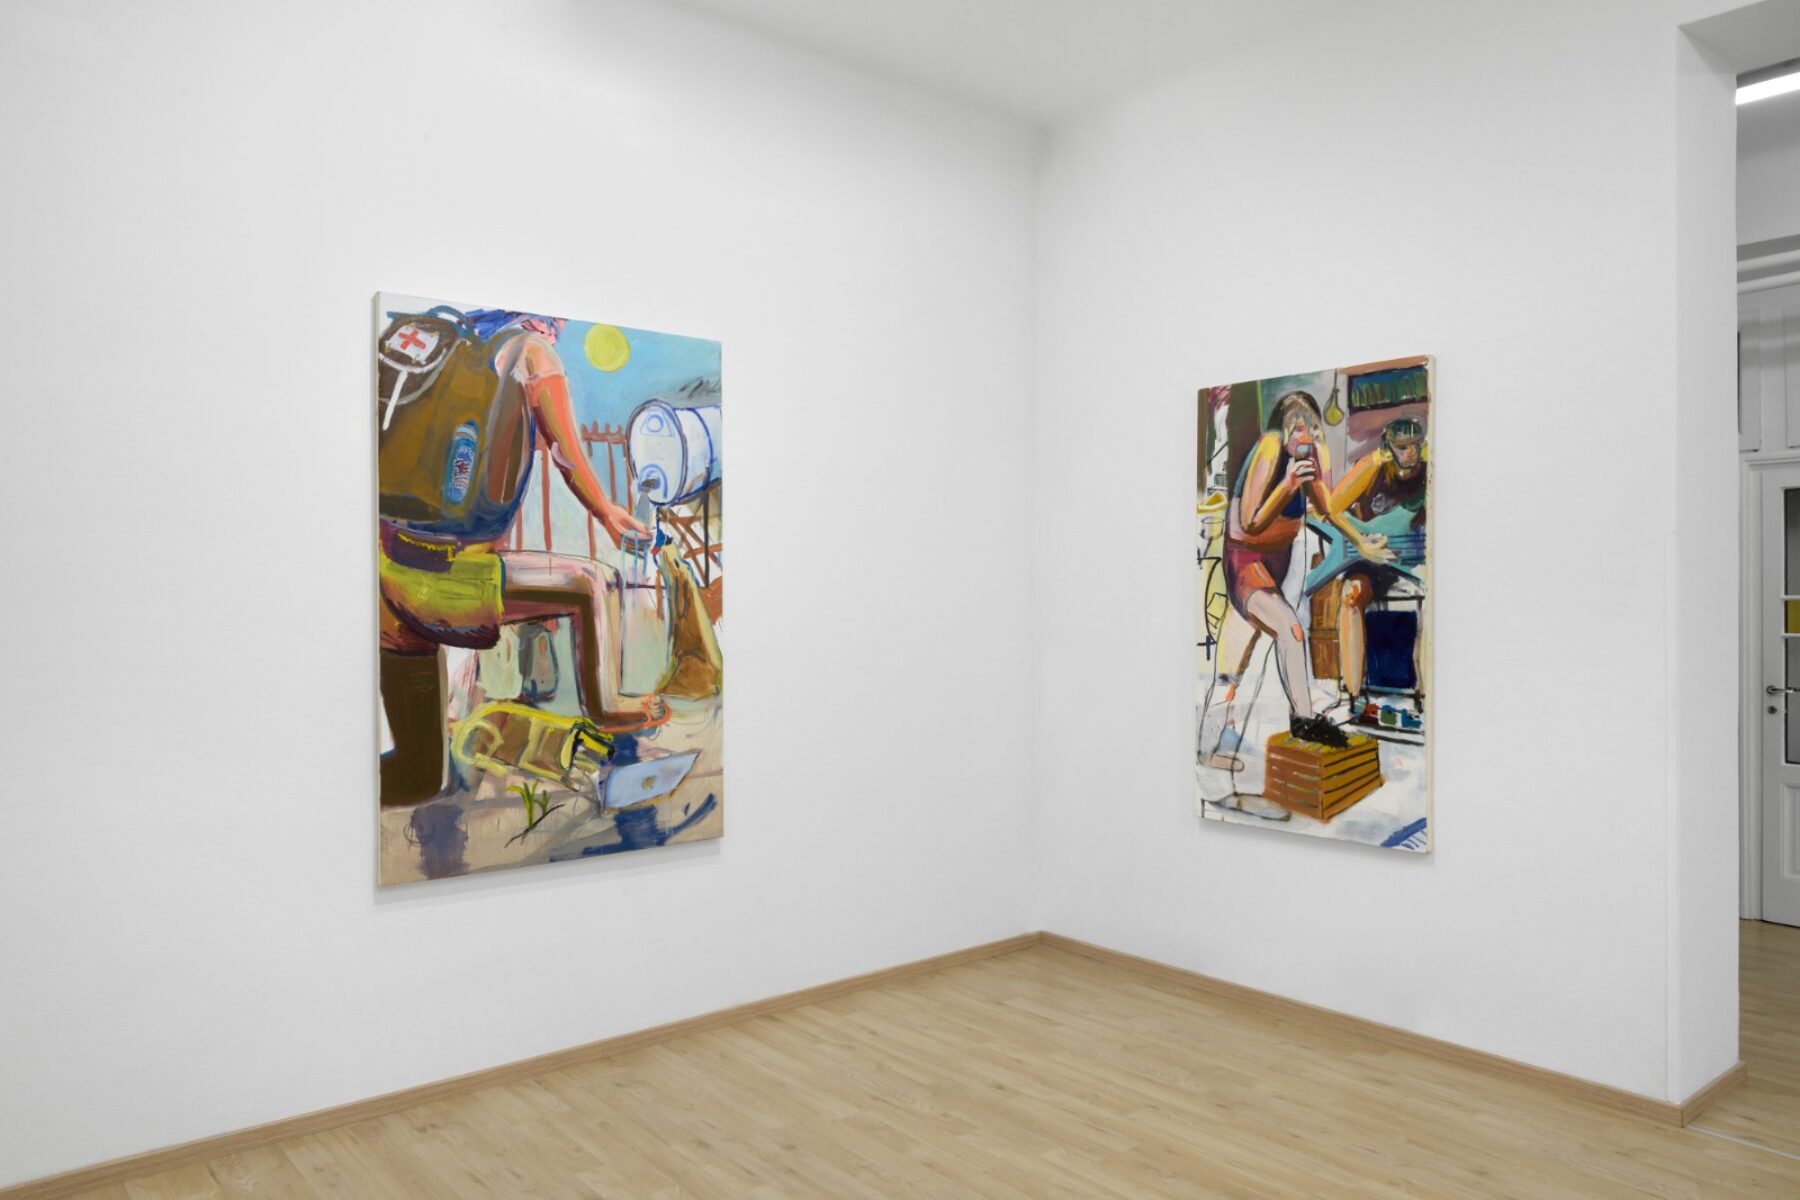 Jacob Patrick Brooks, Panic Room, installation view, A.More Gallery, Milano